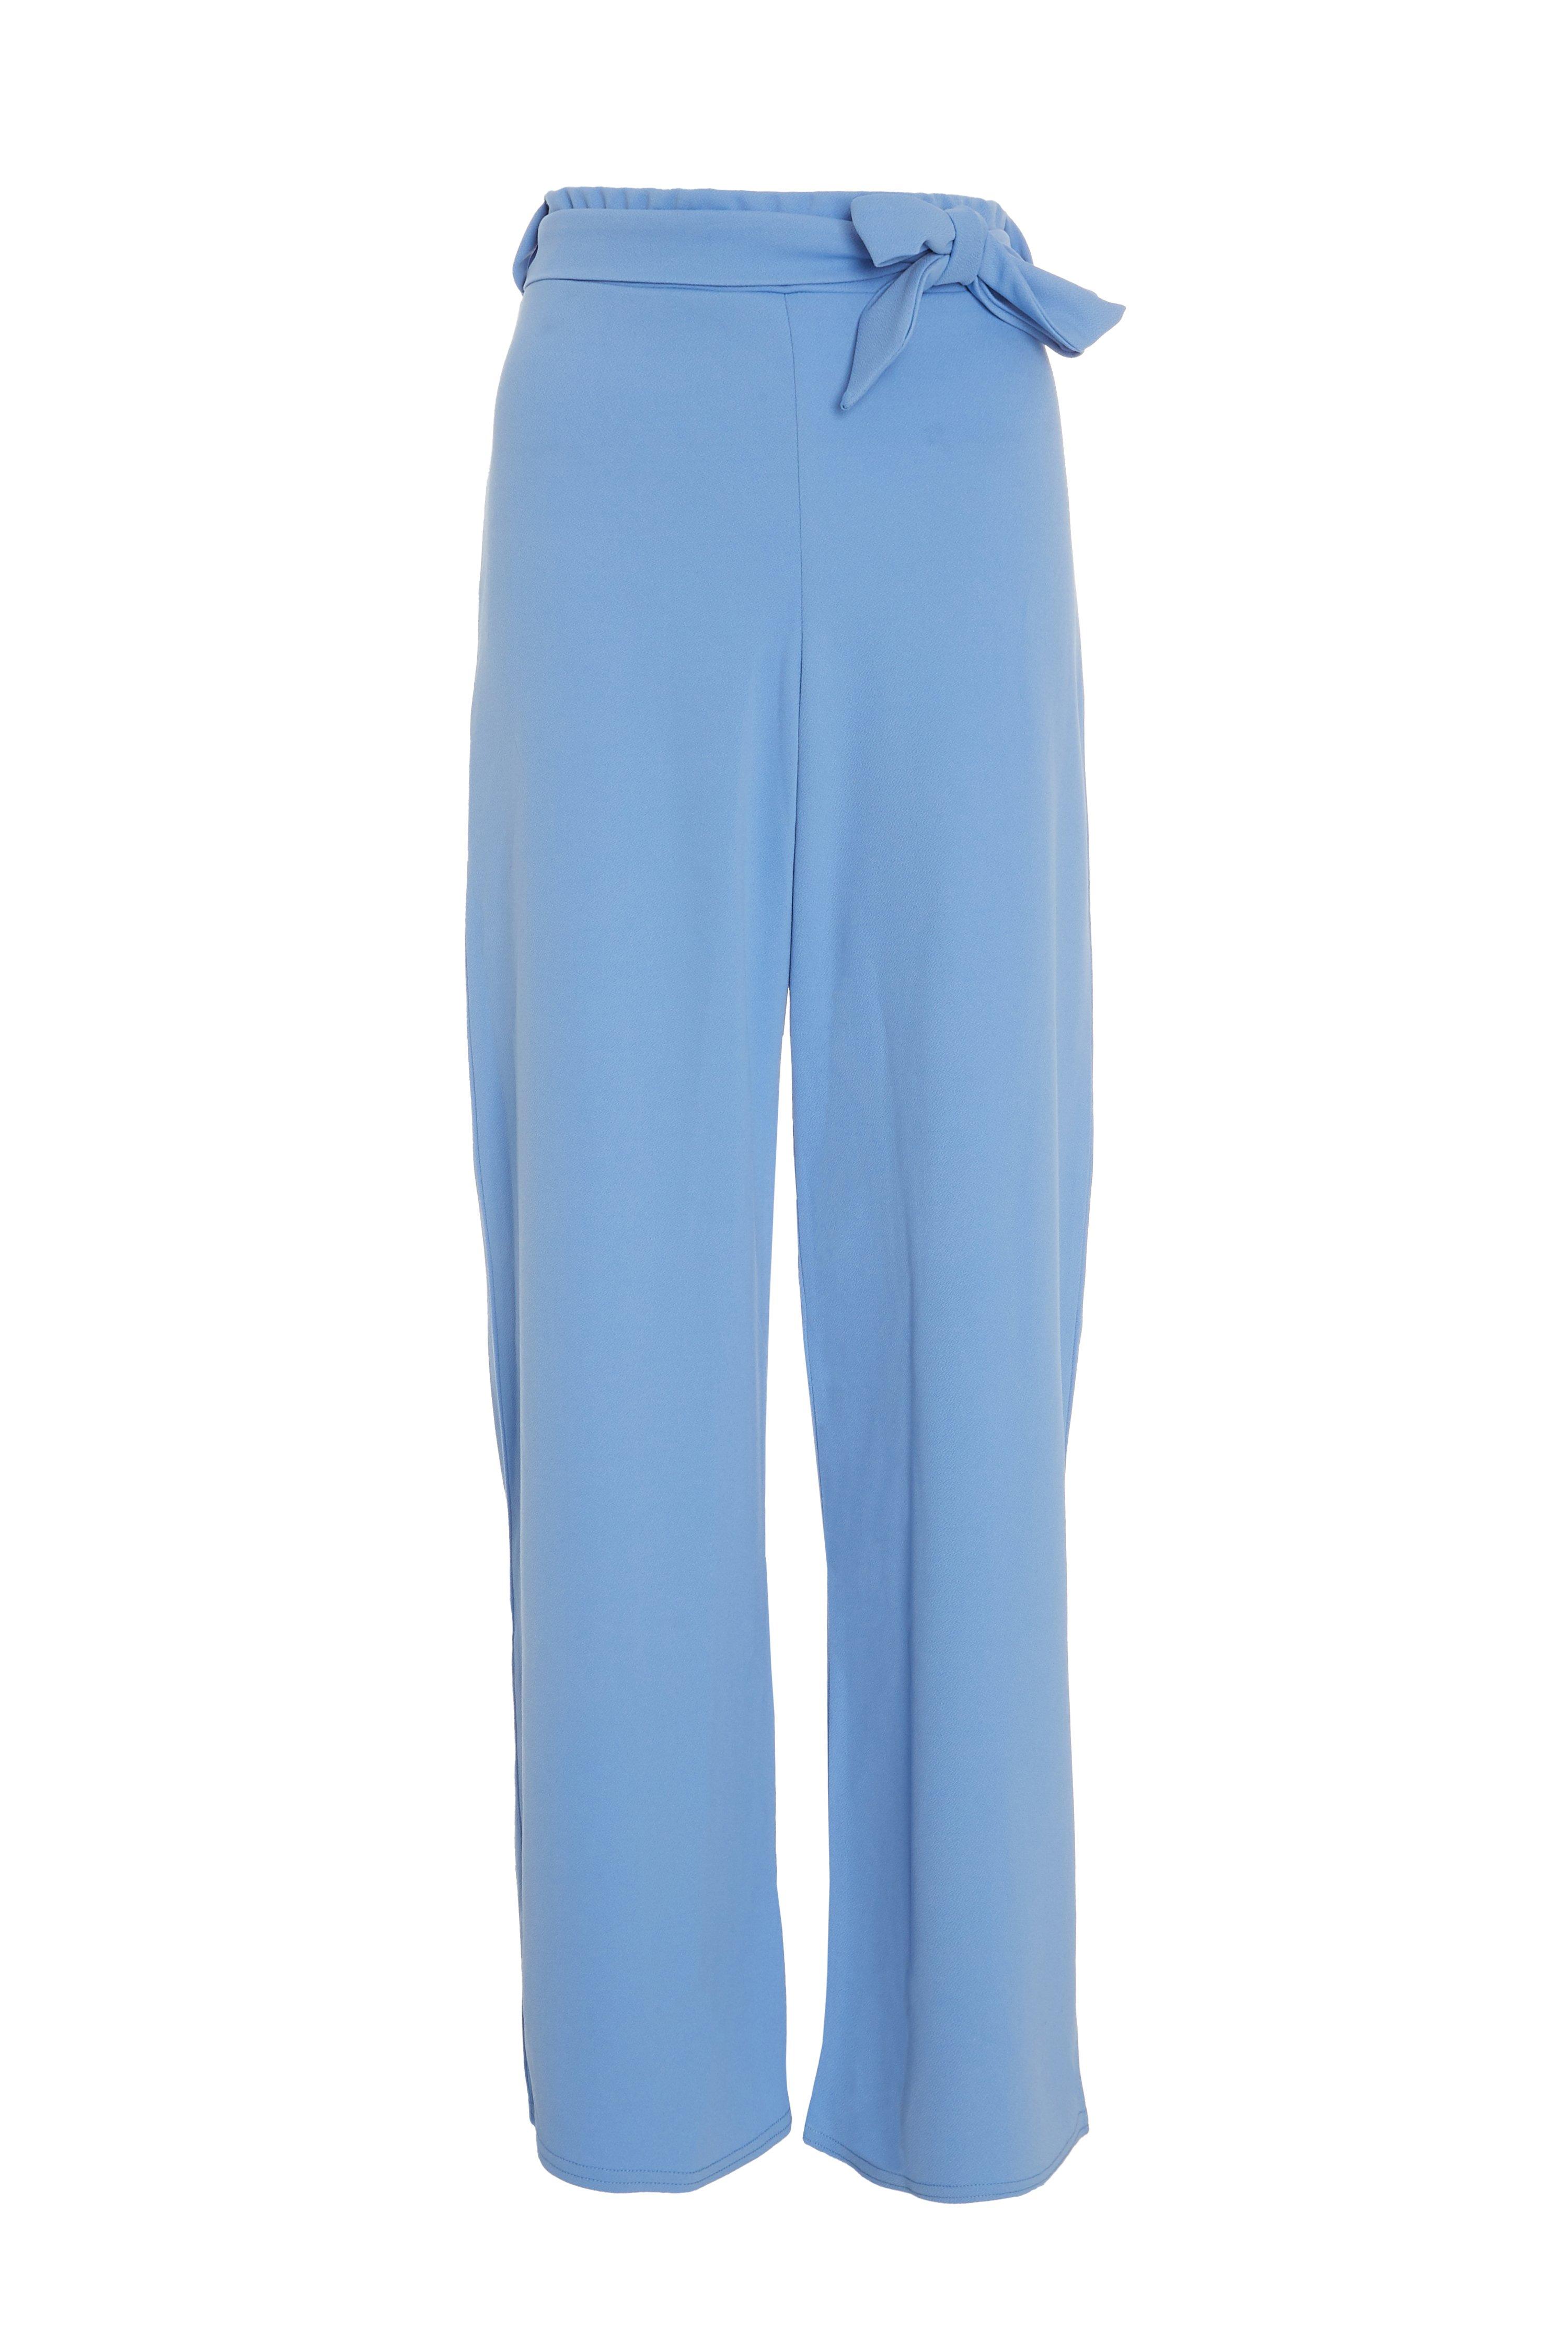 Petite Blue High Waisted Trousers - Quiz Clothing